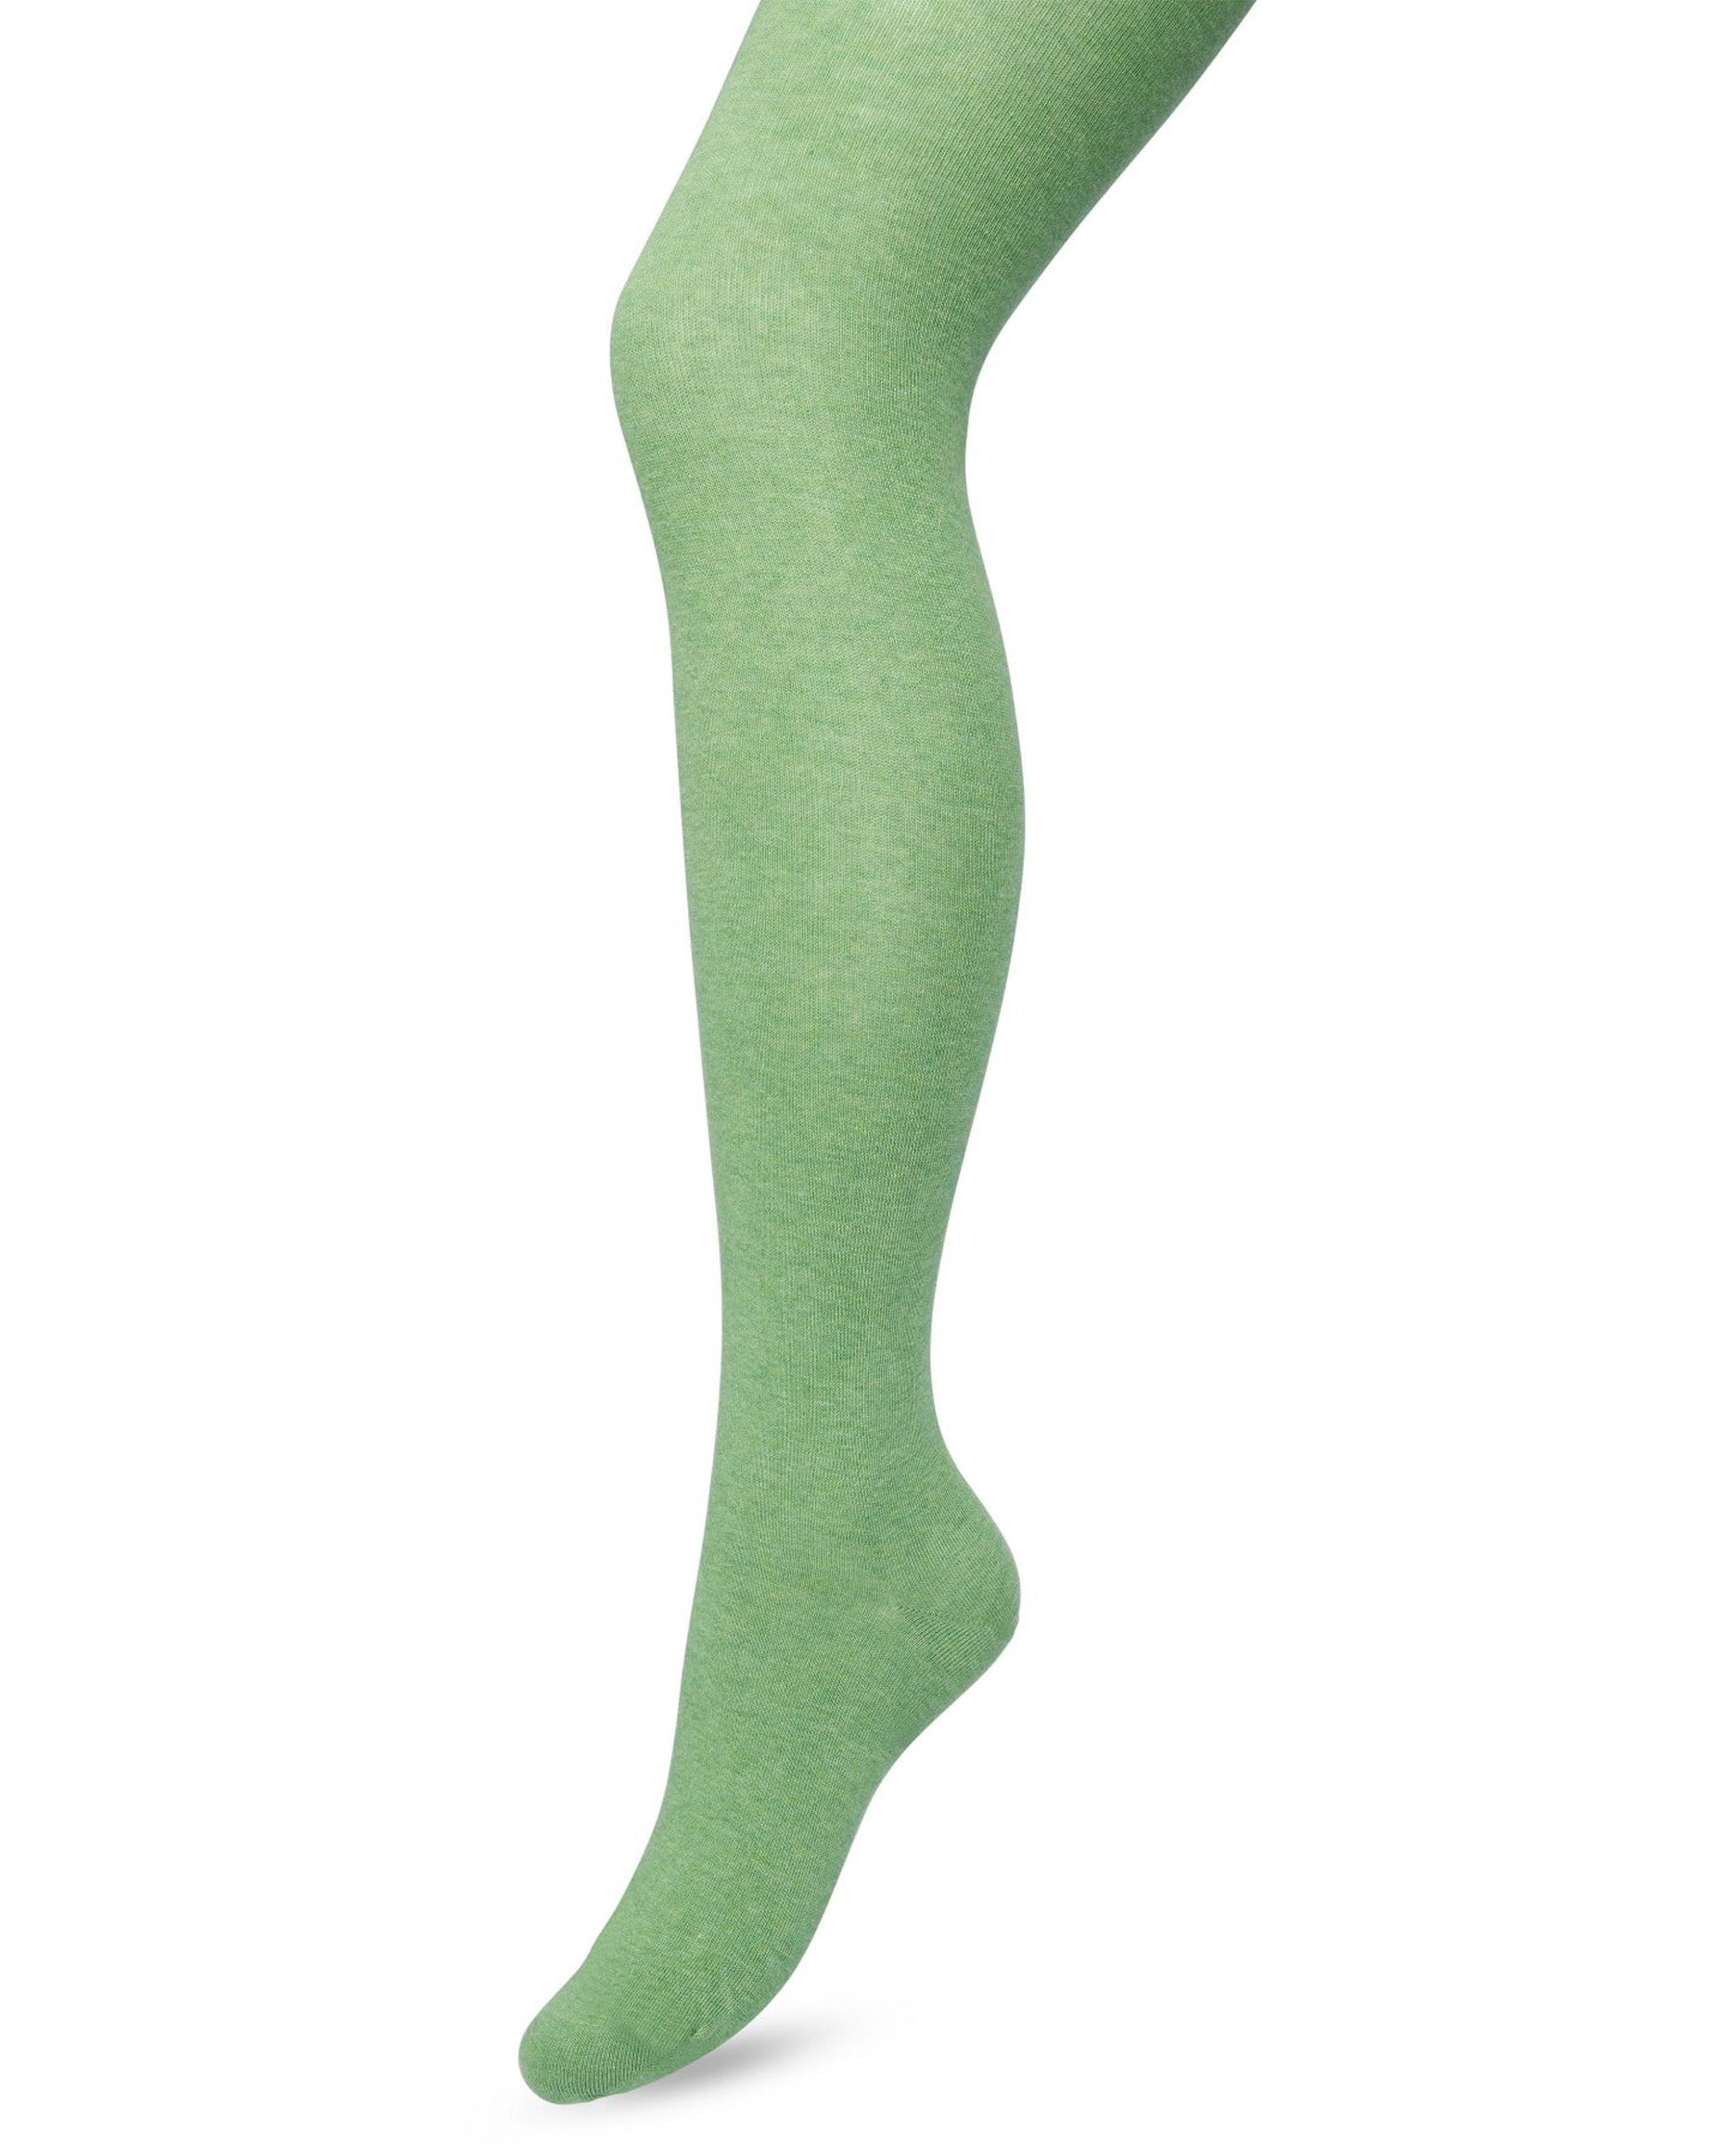 Bonnie Doon Bio Cotton Tights - Light green warm and soft knitted organic cotton Winter thermal tights.